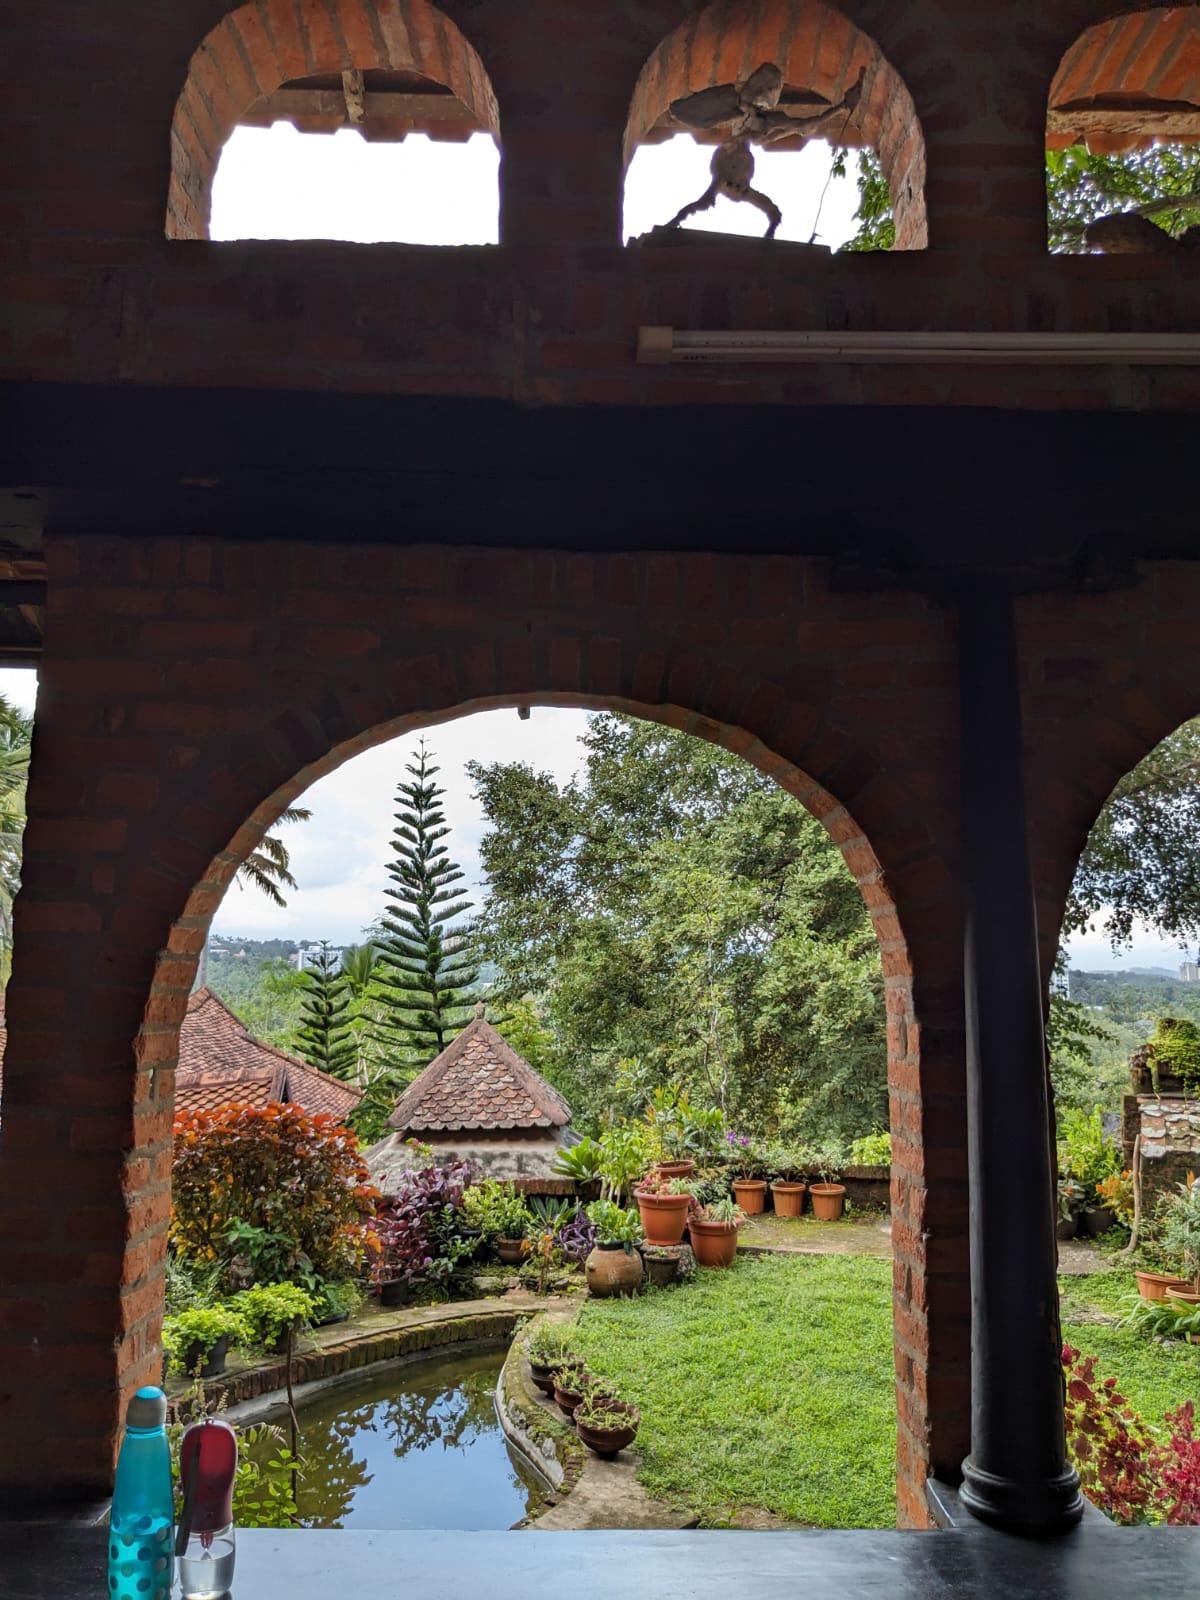 The Hamlet, Laurie Baker’s home in Thiruvananthapuram,  is a place where one can be one with Nature.